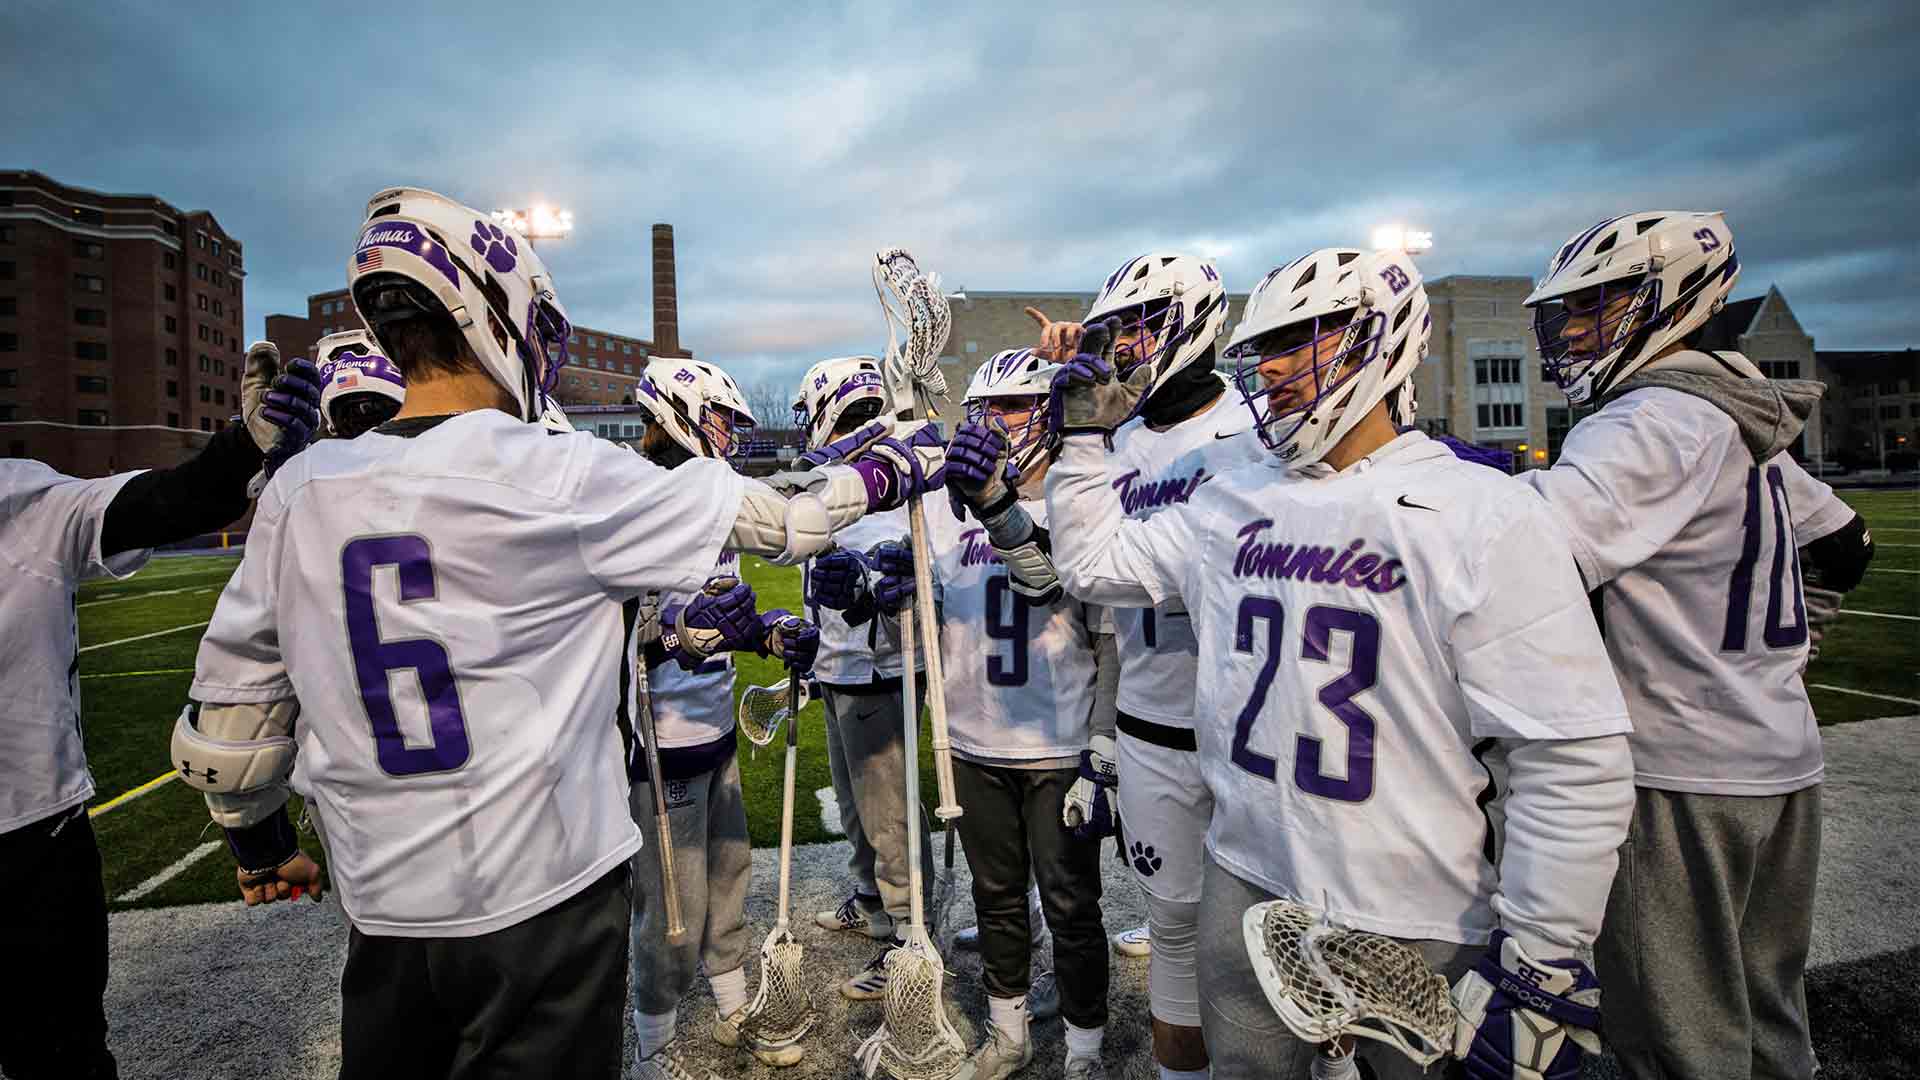 Lacrosse players high fiving